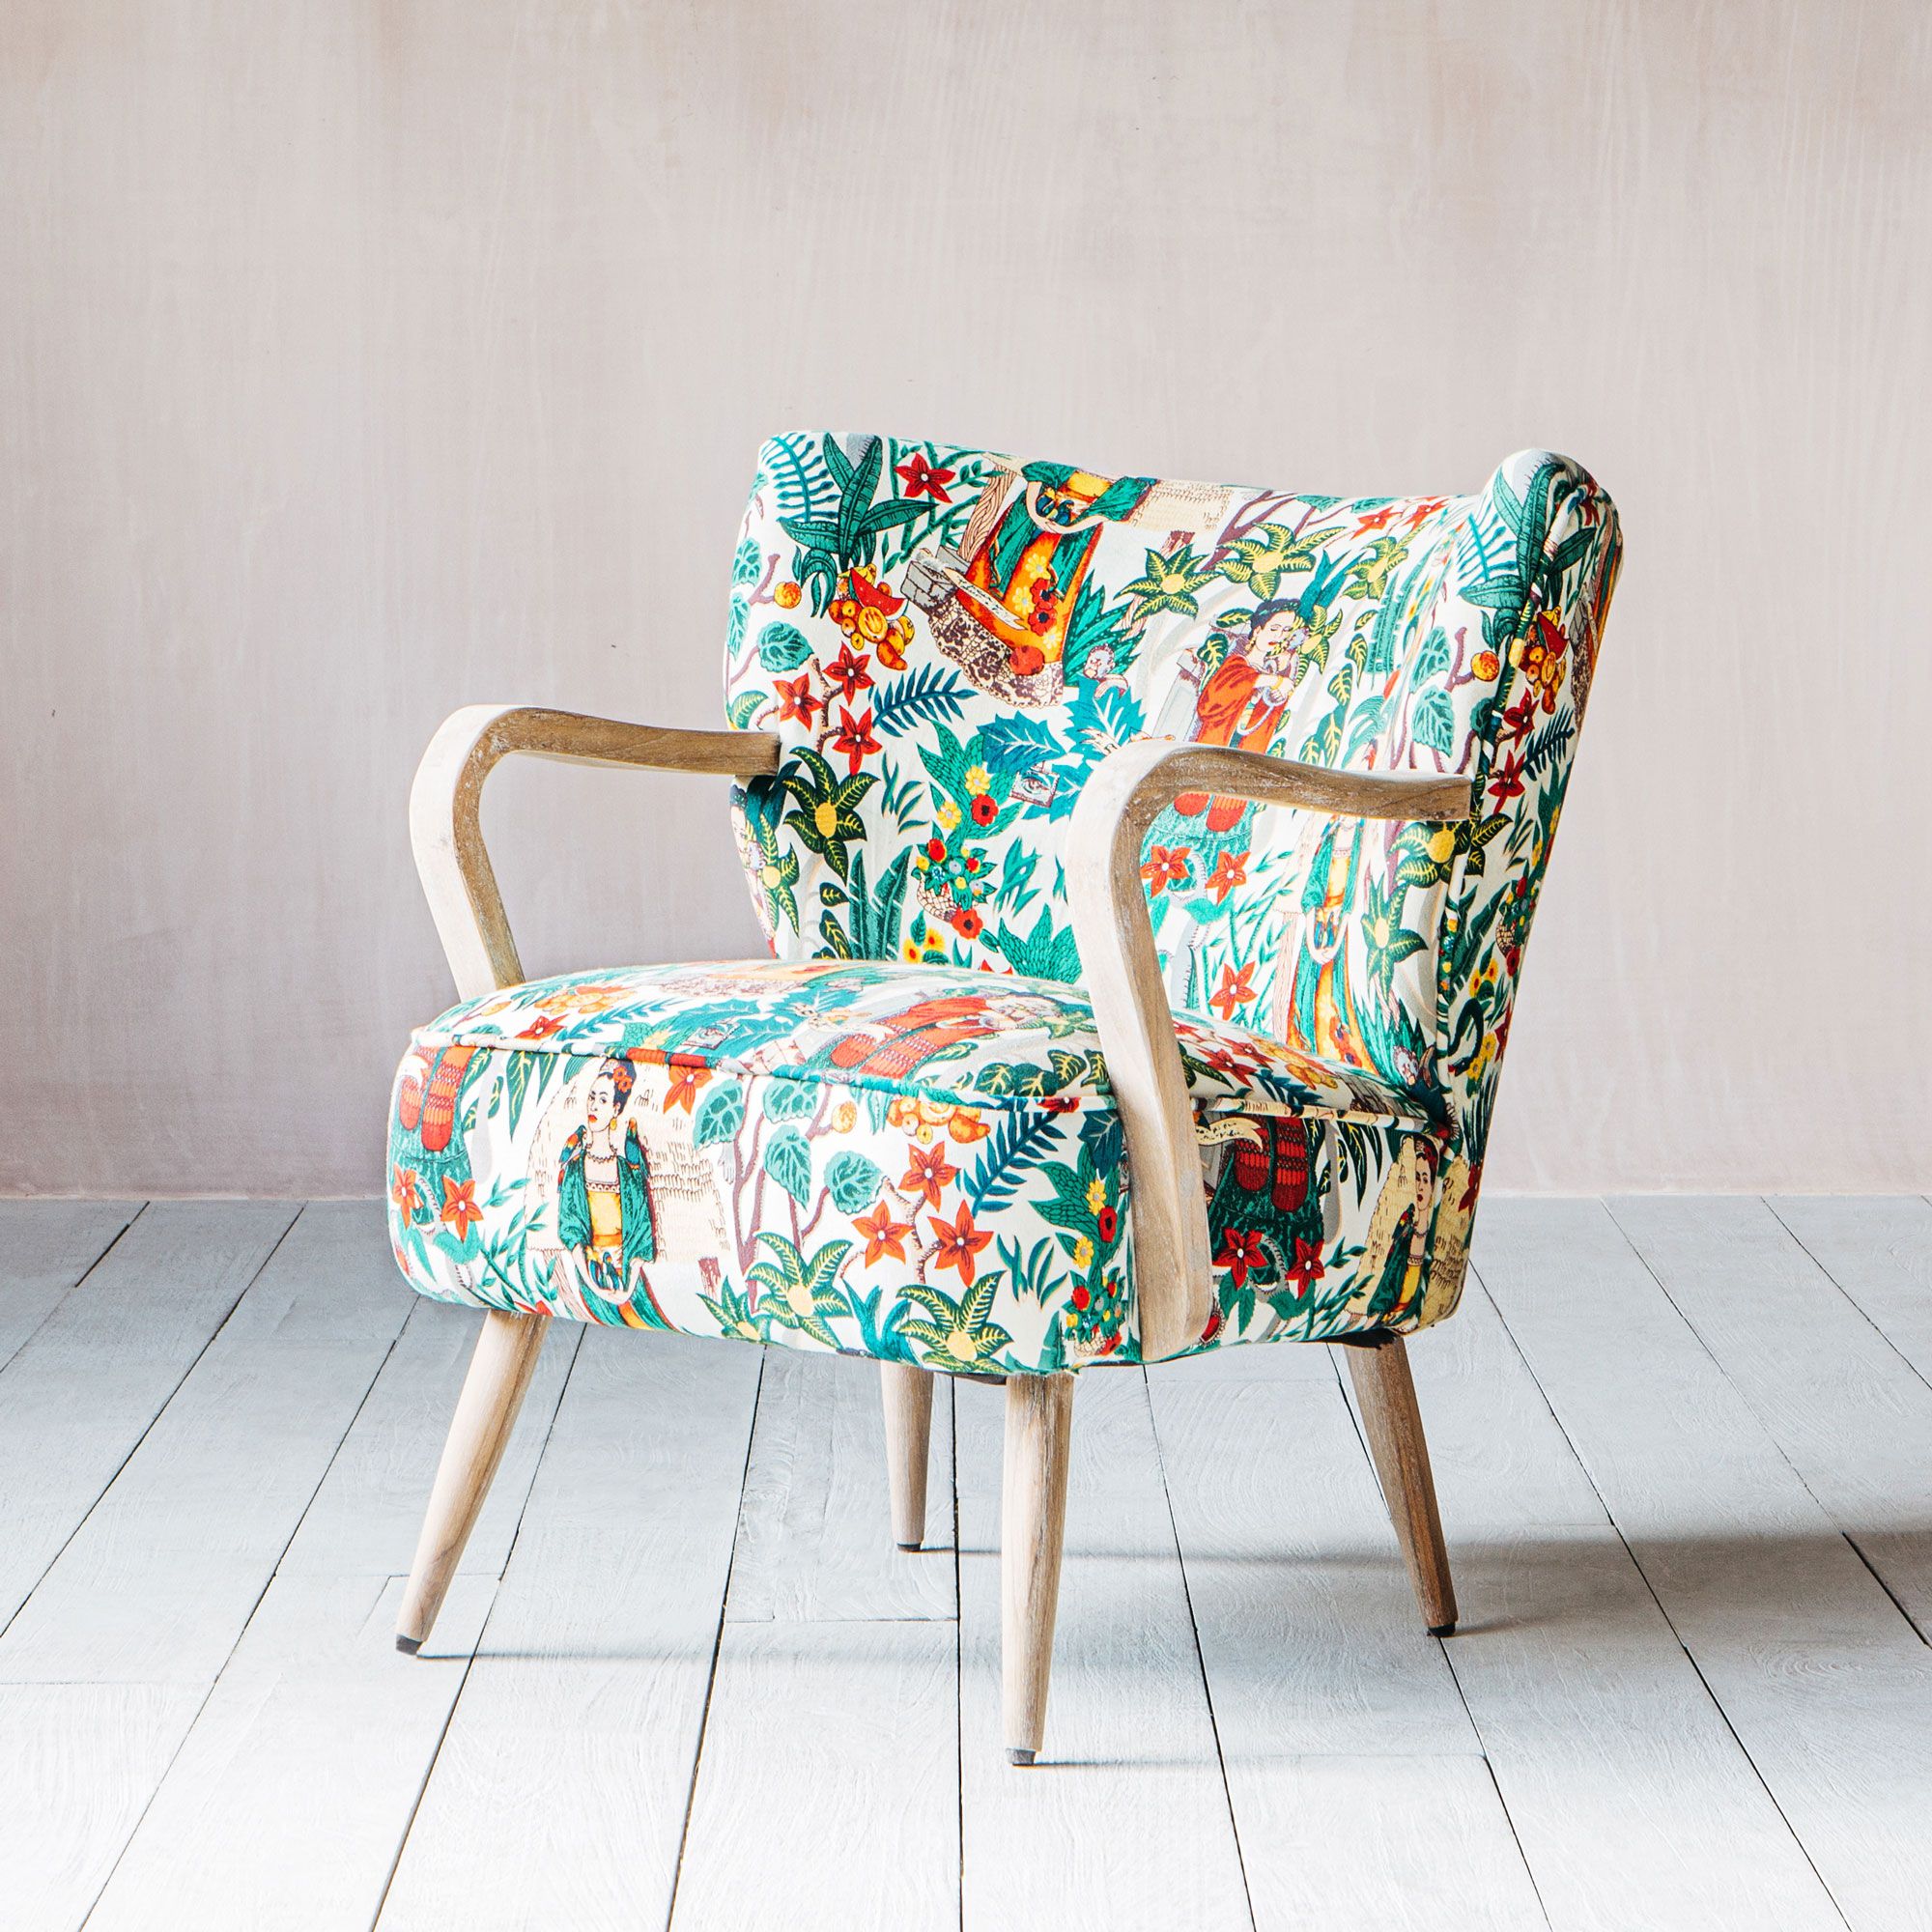 Lina Mexicana Multi-colour Upholstered Wood Armchair